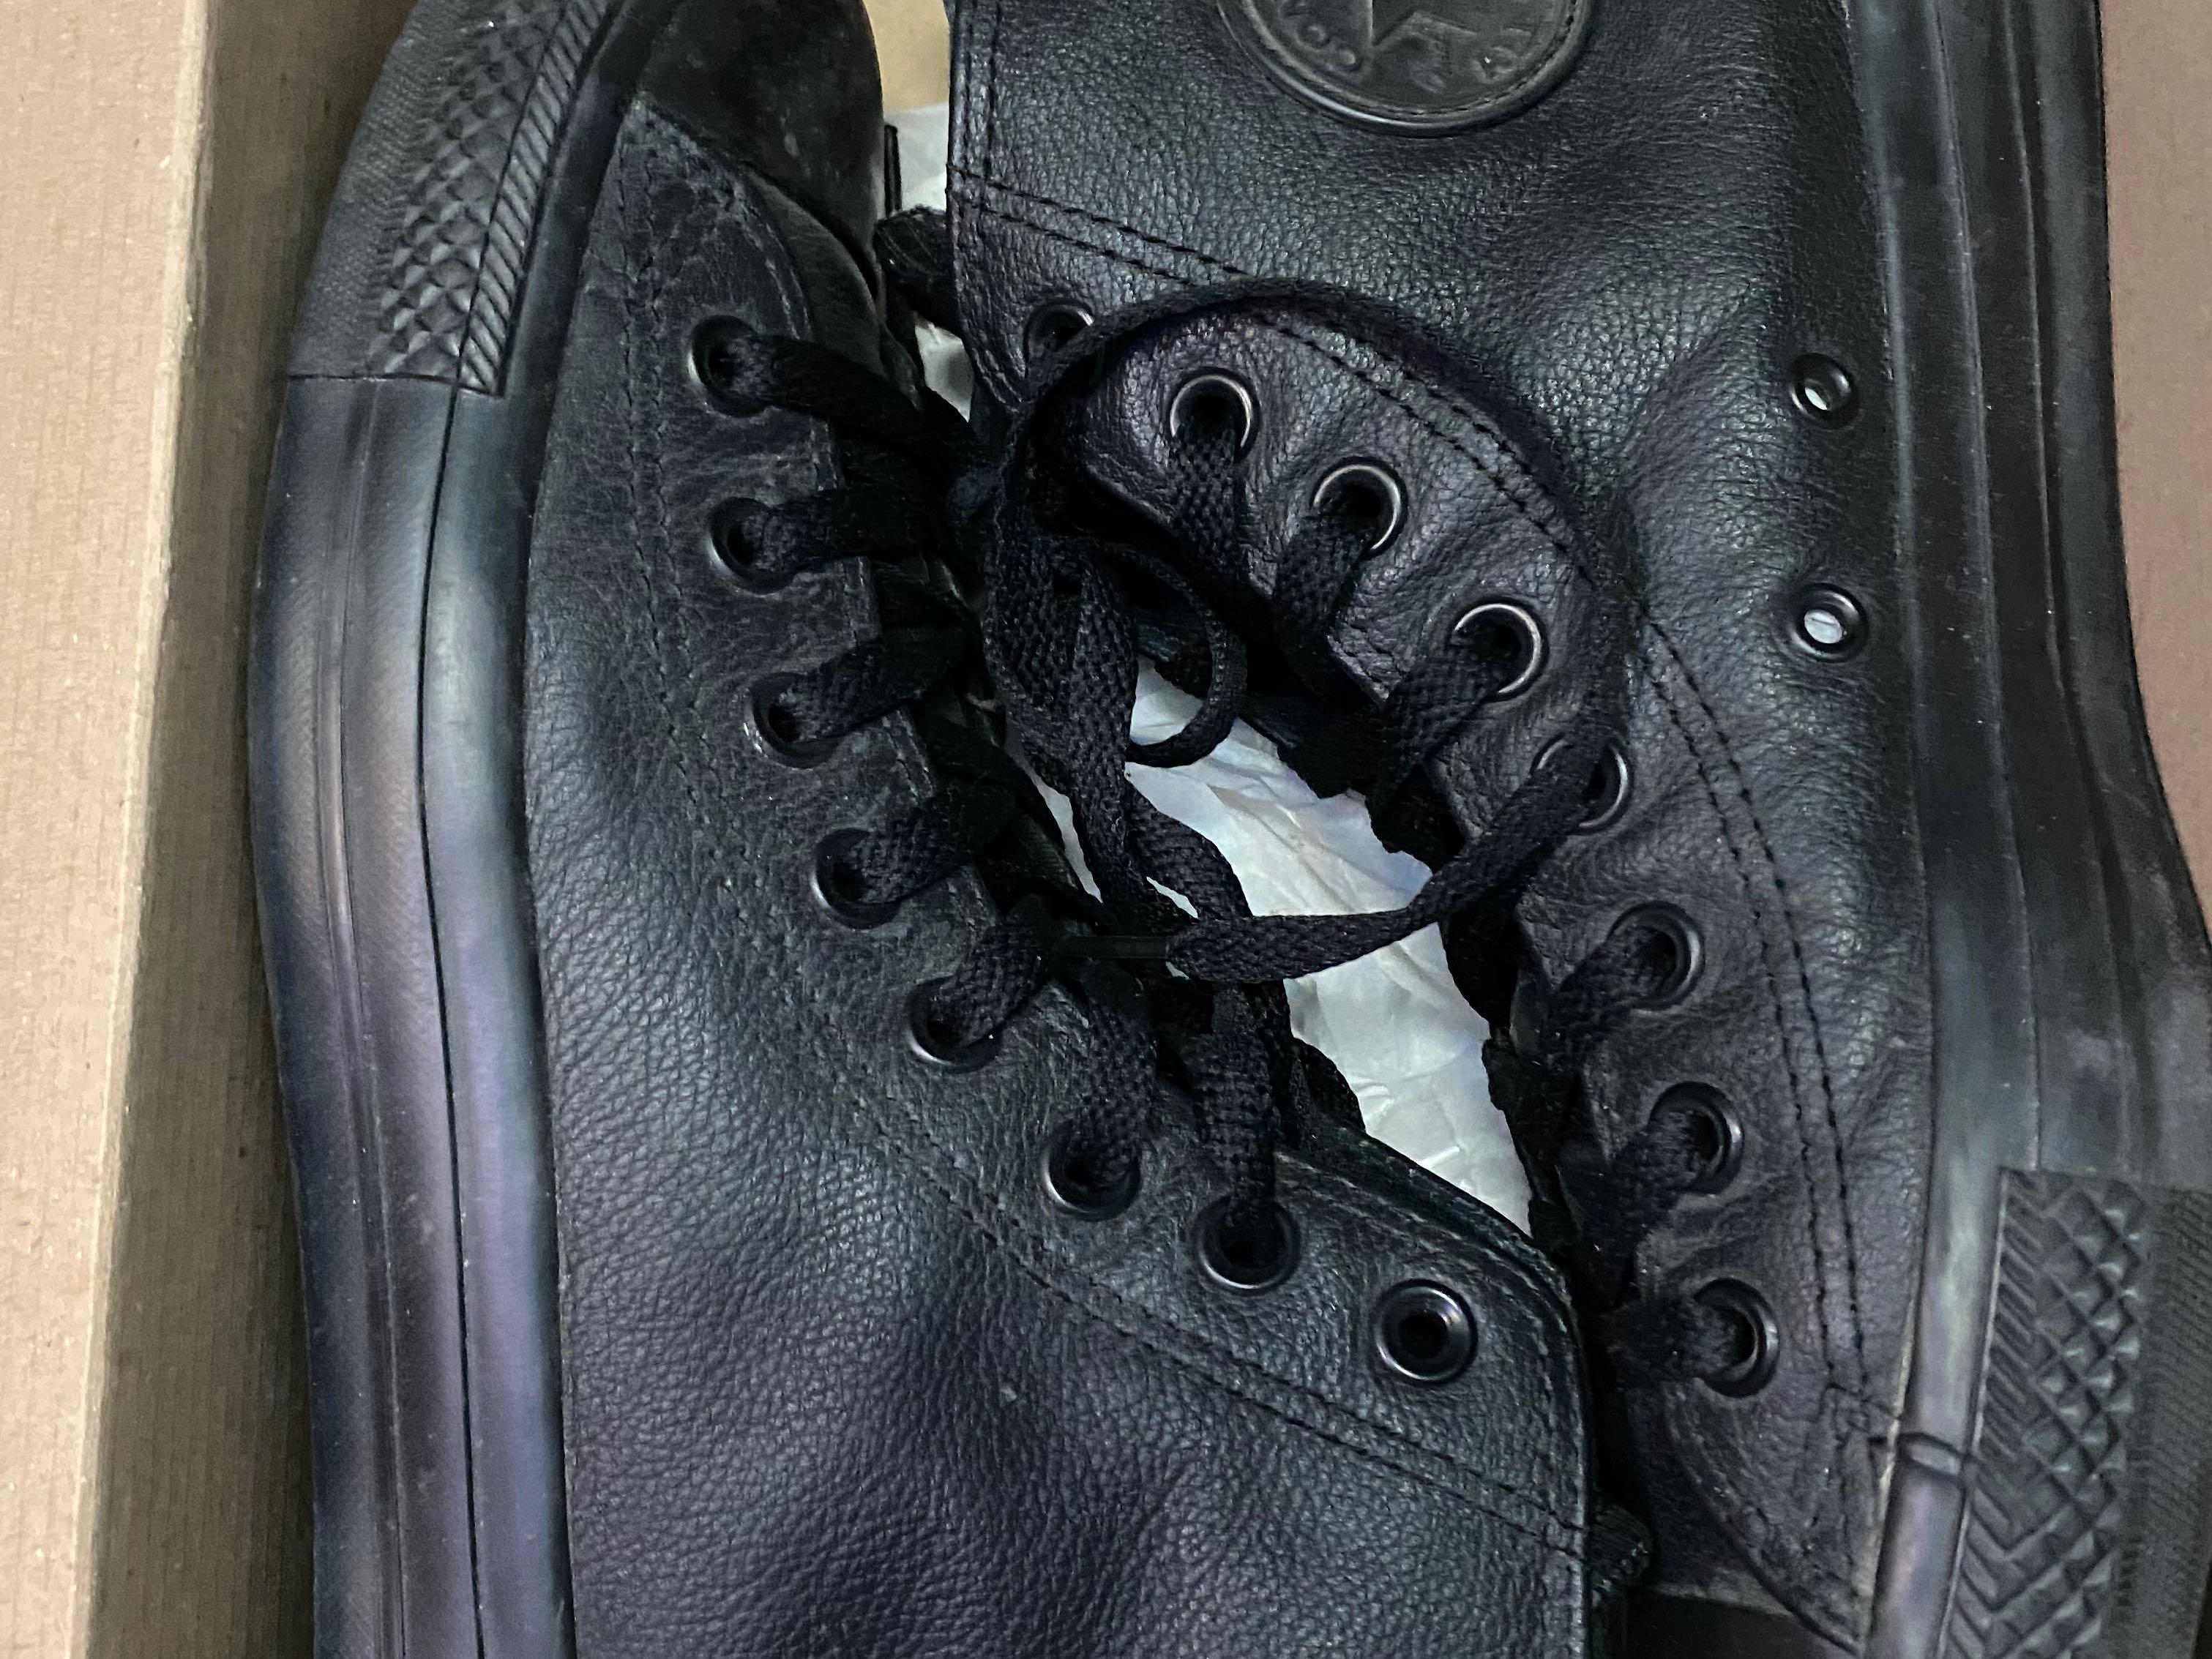 Converse Chuck Taylor Leather, Men's Fashion, Footwear, Sneakers